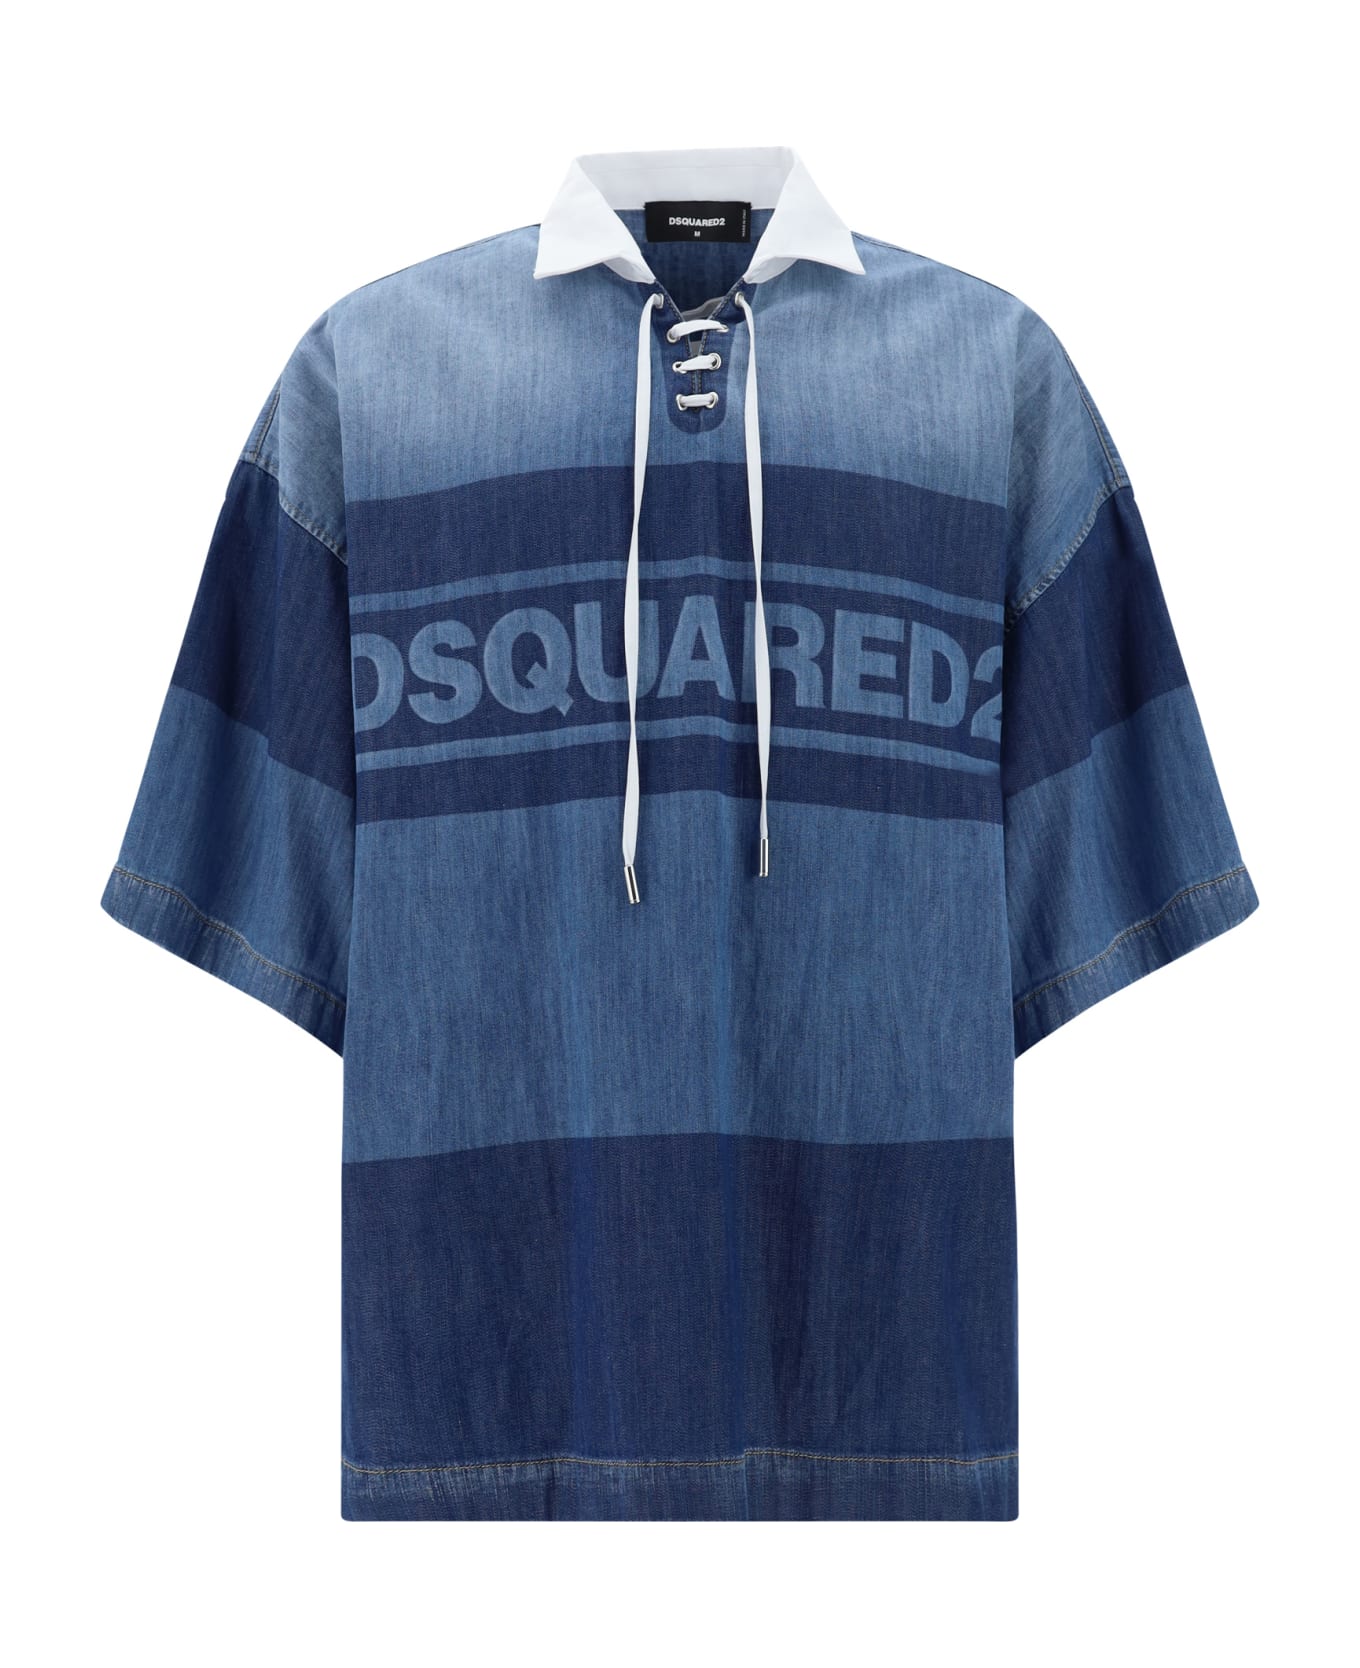 Dsquared2 Polo Shirt - Blue シャツ